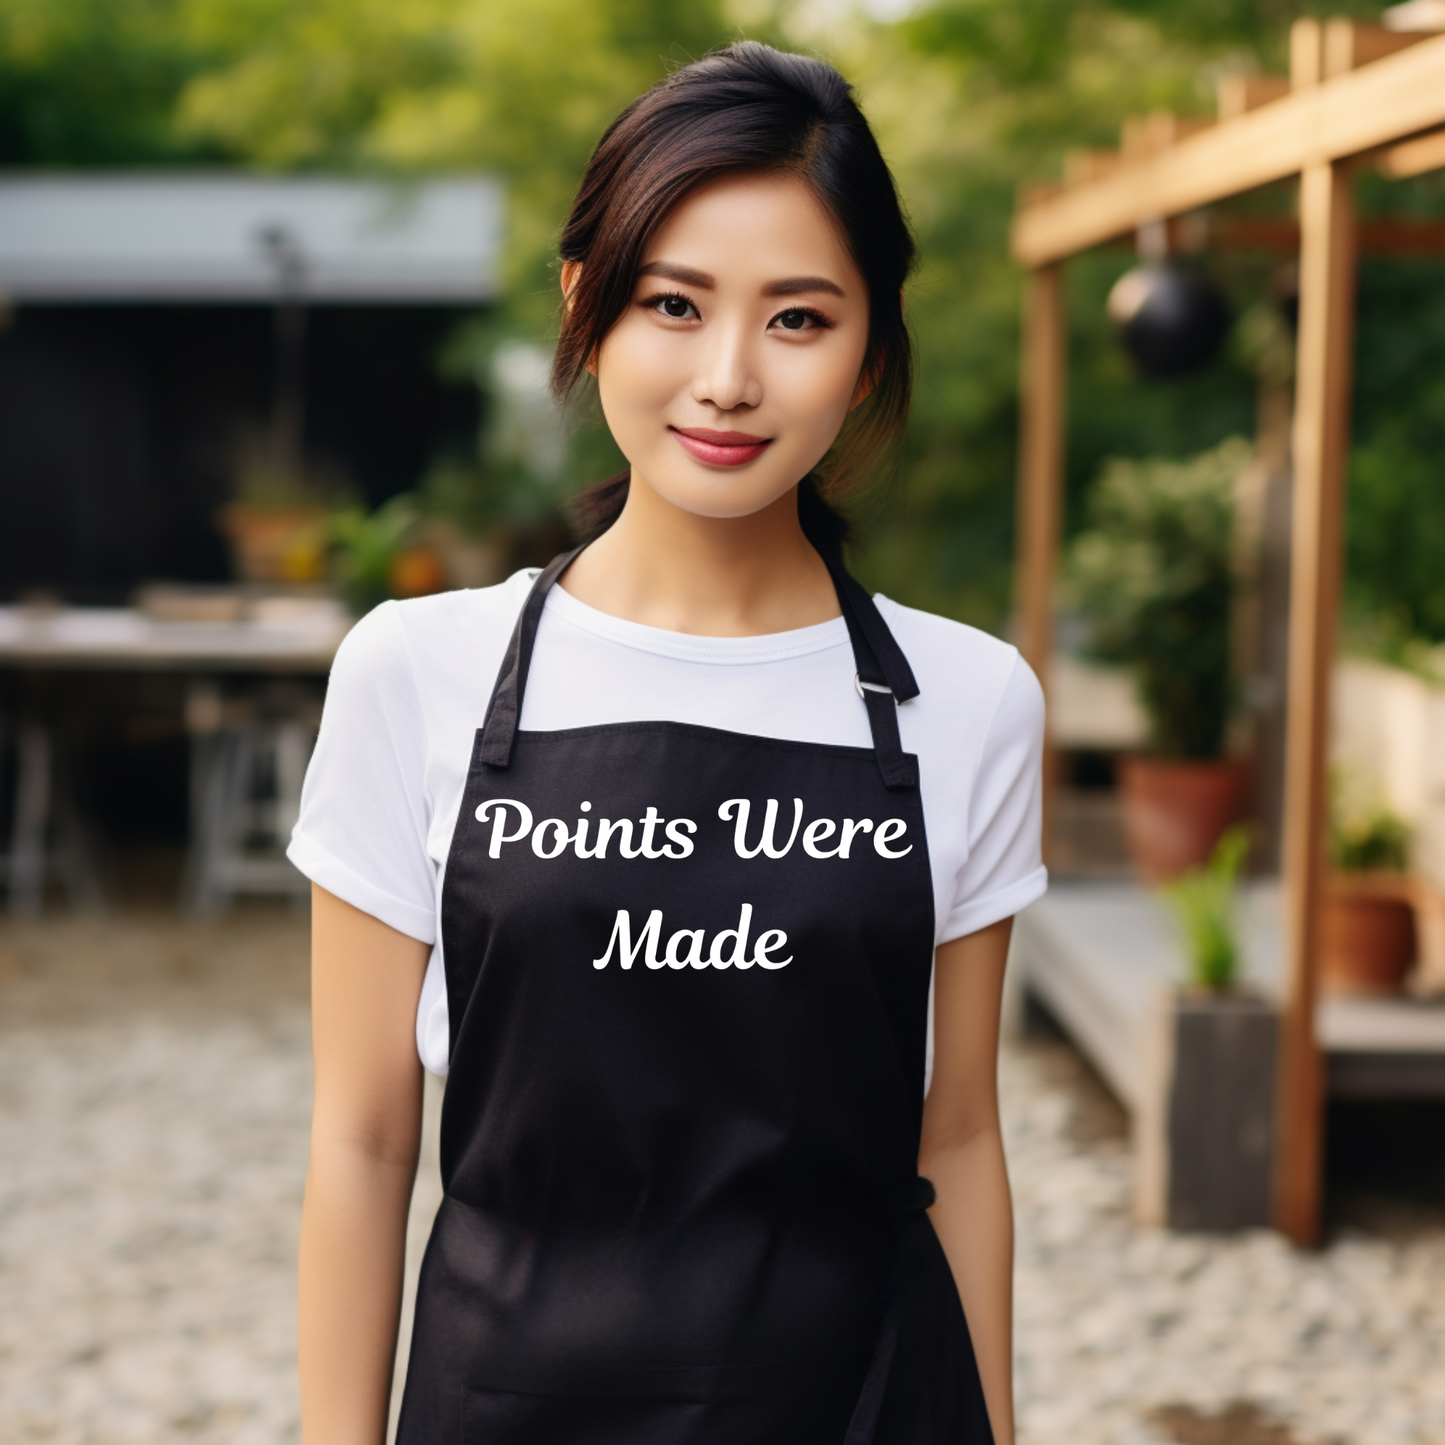 Points Were Made Apron Black with White Lettering